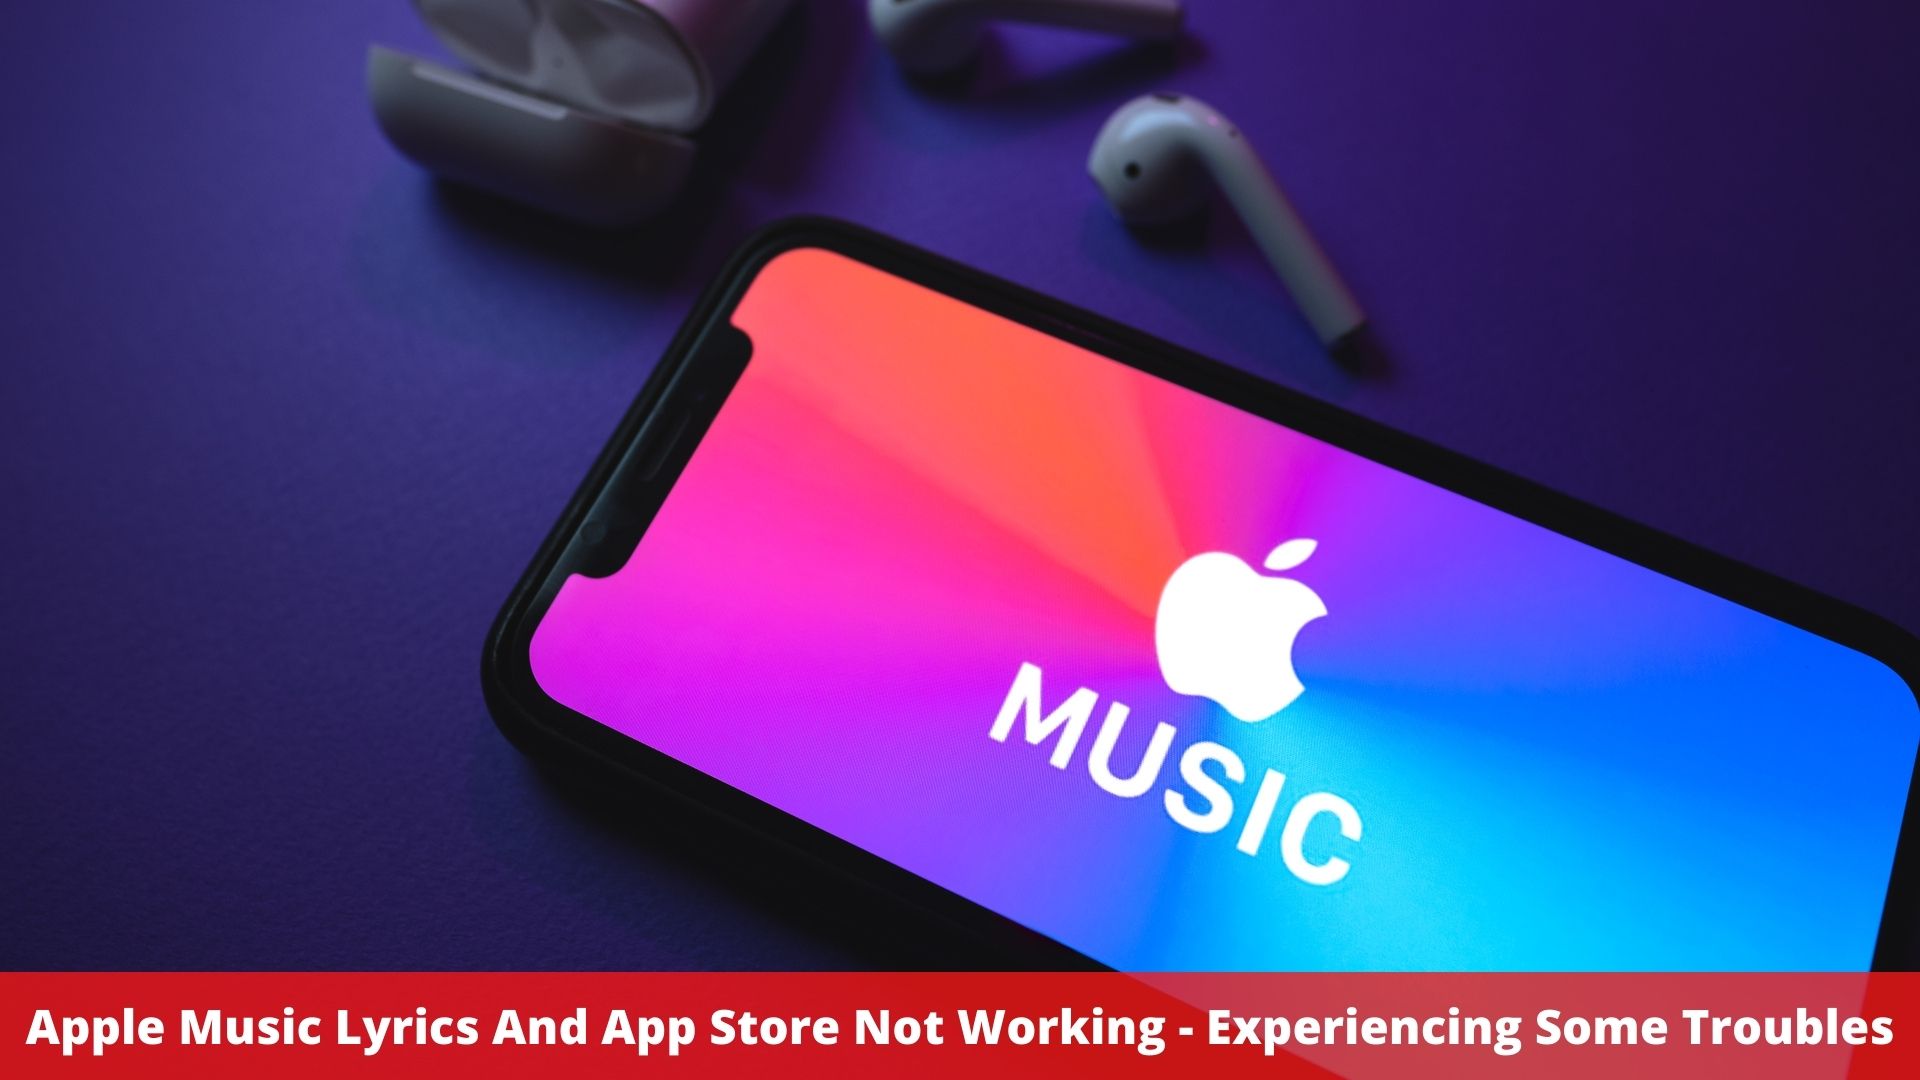 Apple Music Lyrics And App Store Not Working - Experiencing Some Troubles